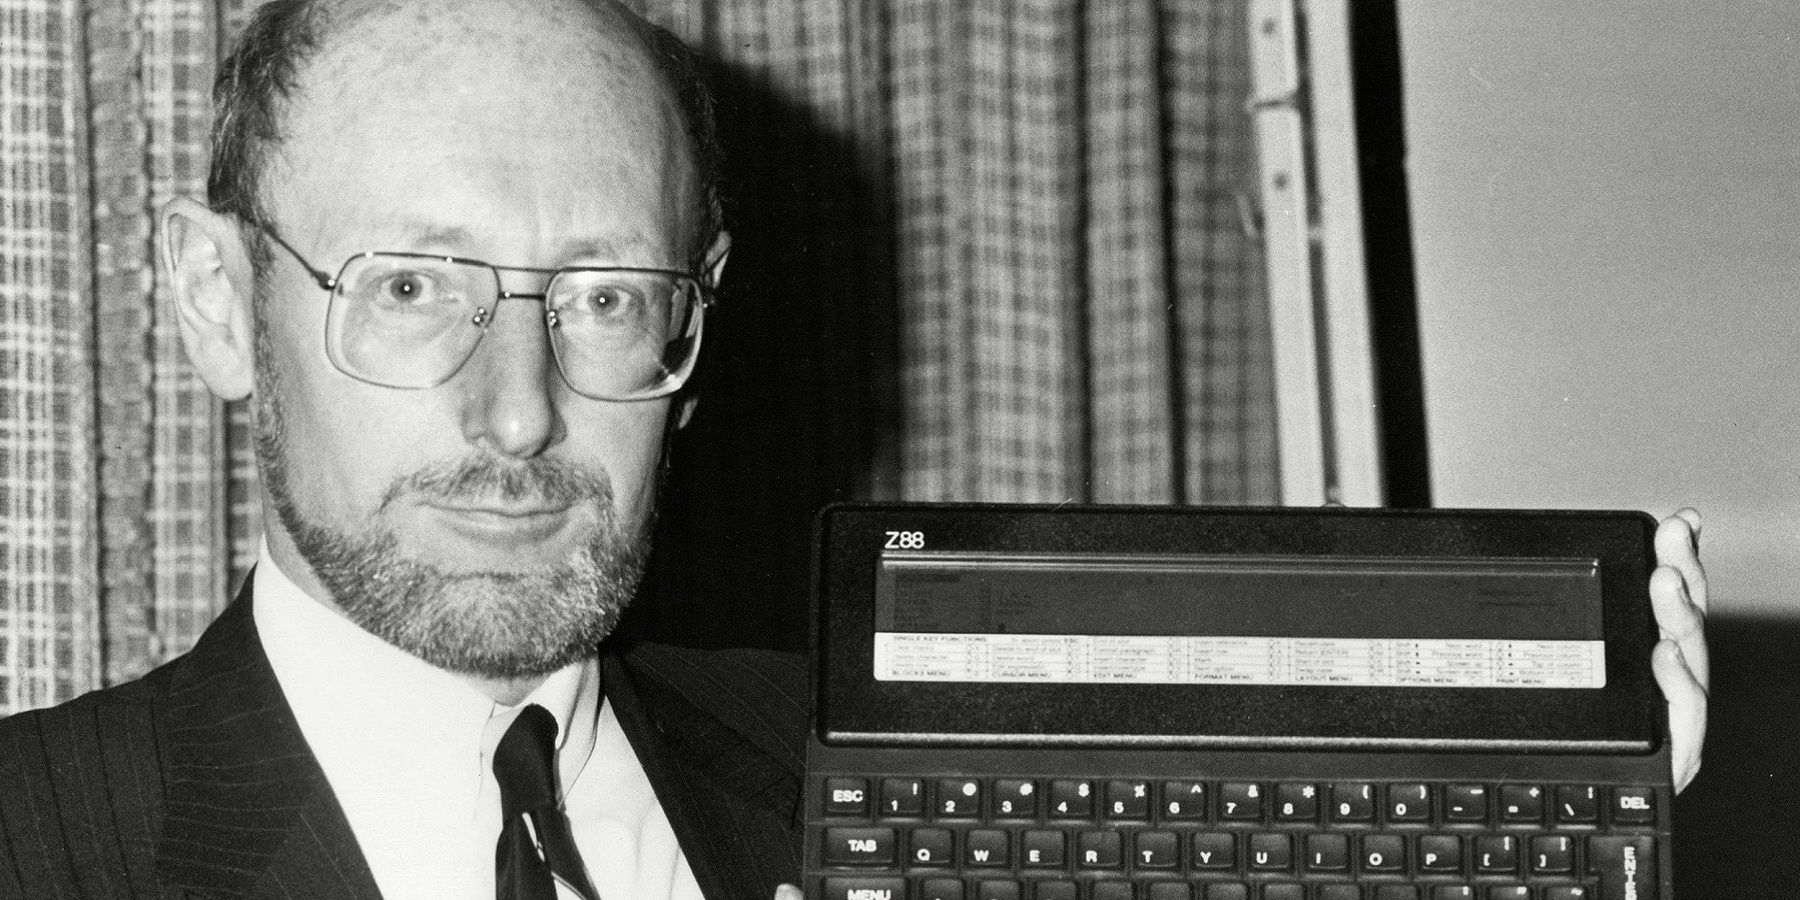 Black and white photo of Sir Clive Sinclair holding a Z88.